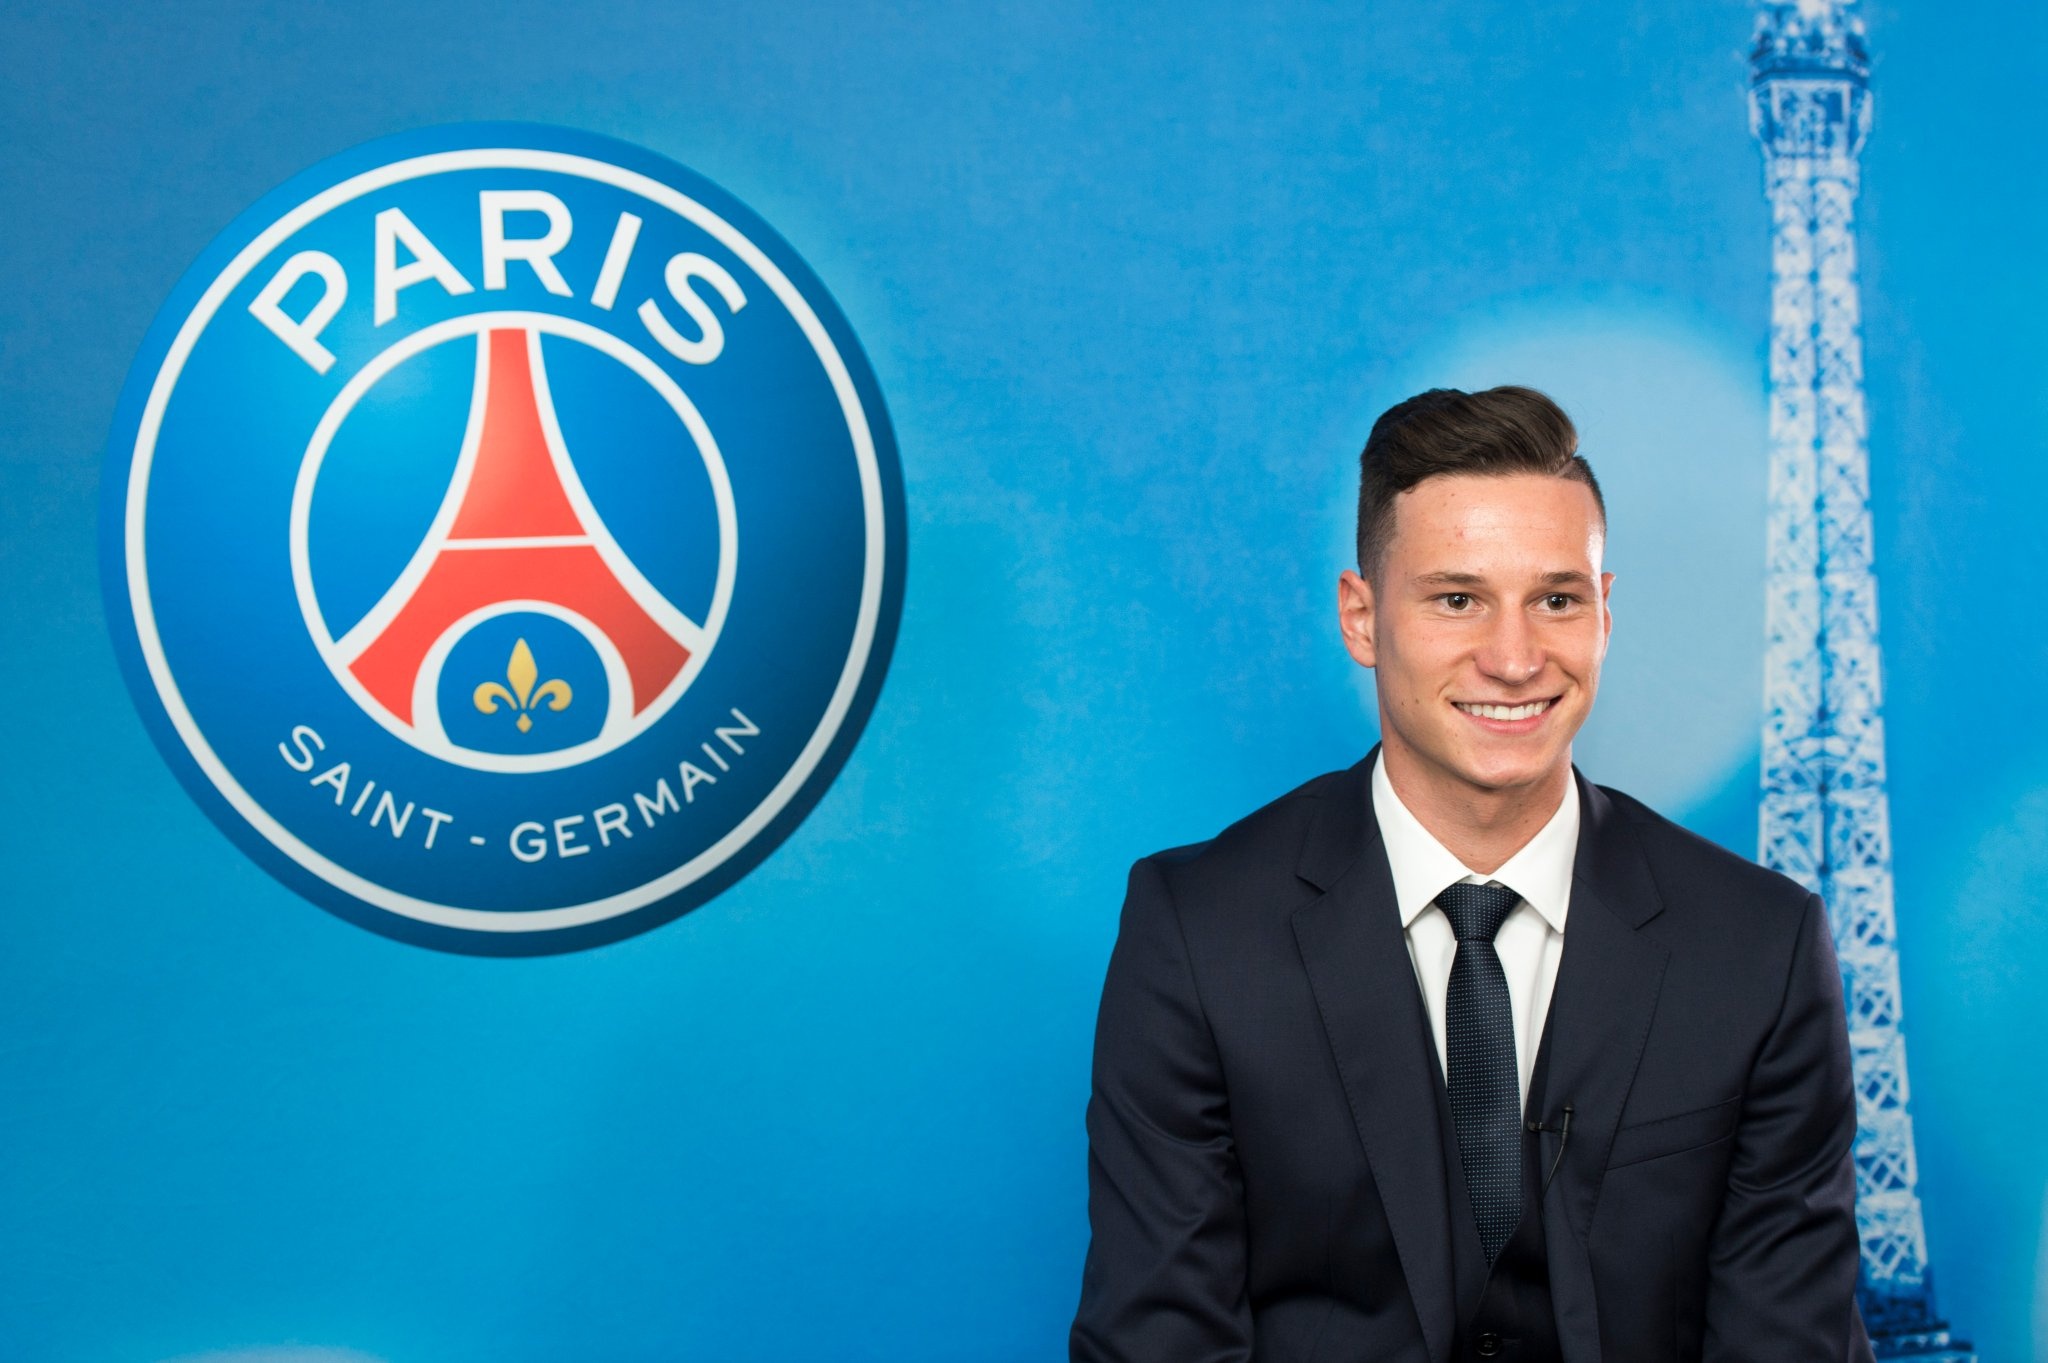 The German has officially joined the French club. PSG_inside